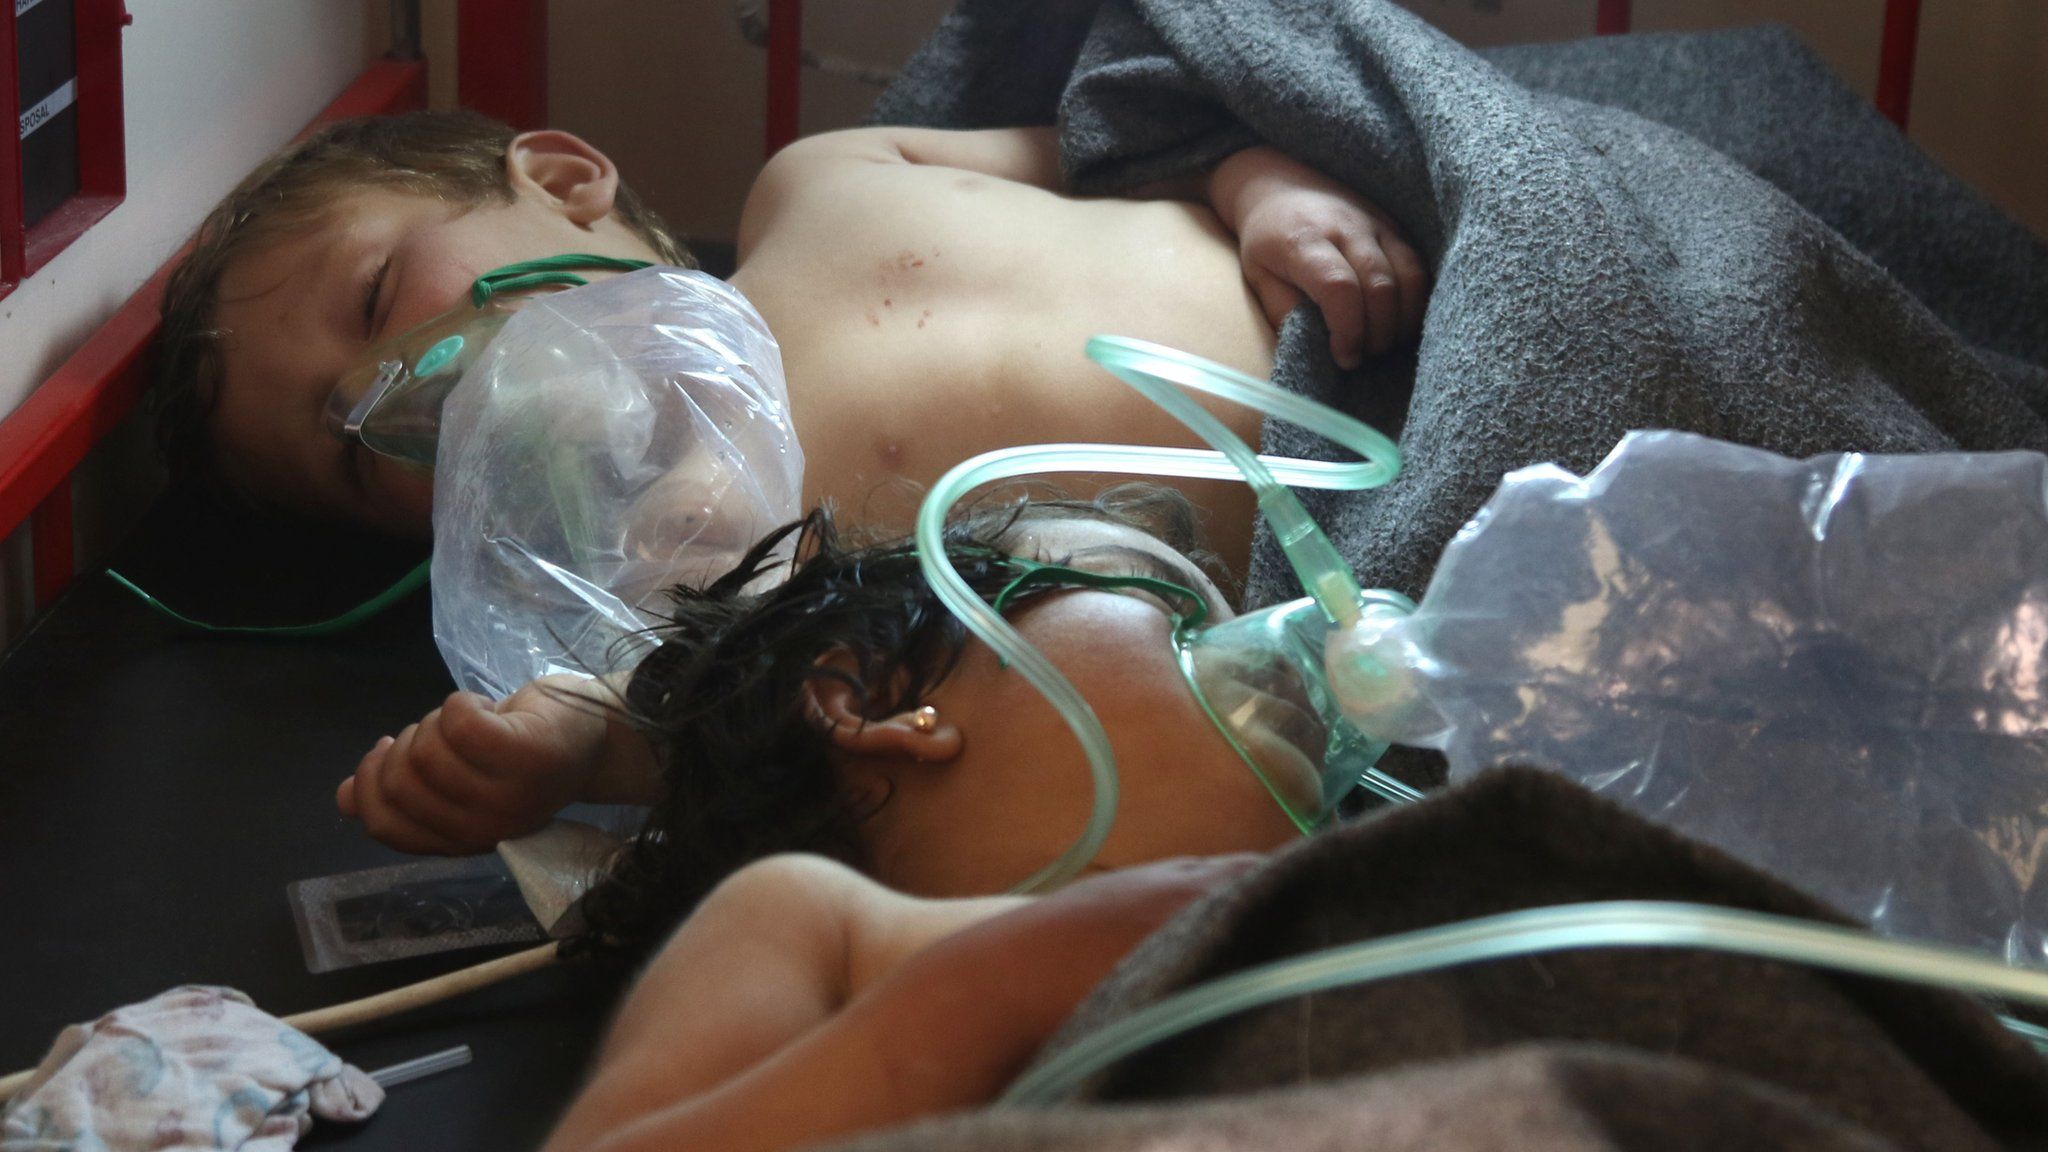 Syrian children receive treatment following a suspected toxic gas attack in Khan Sheikhun, a rebel-held town in the north-western Idlib province, Syria, 4 April 2017